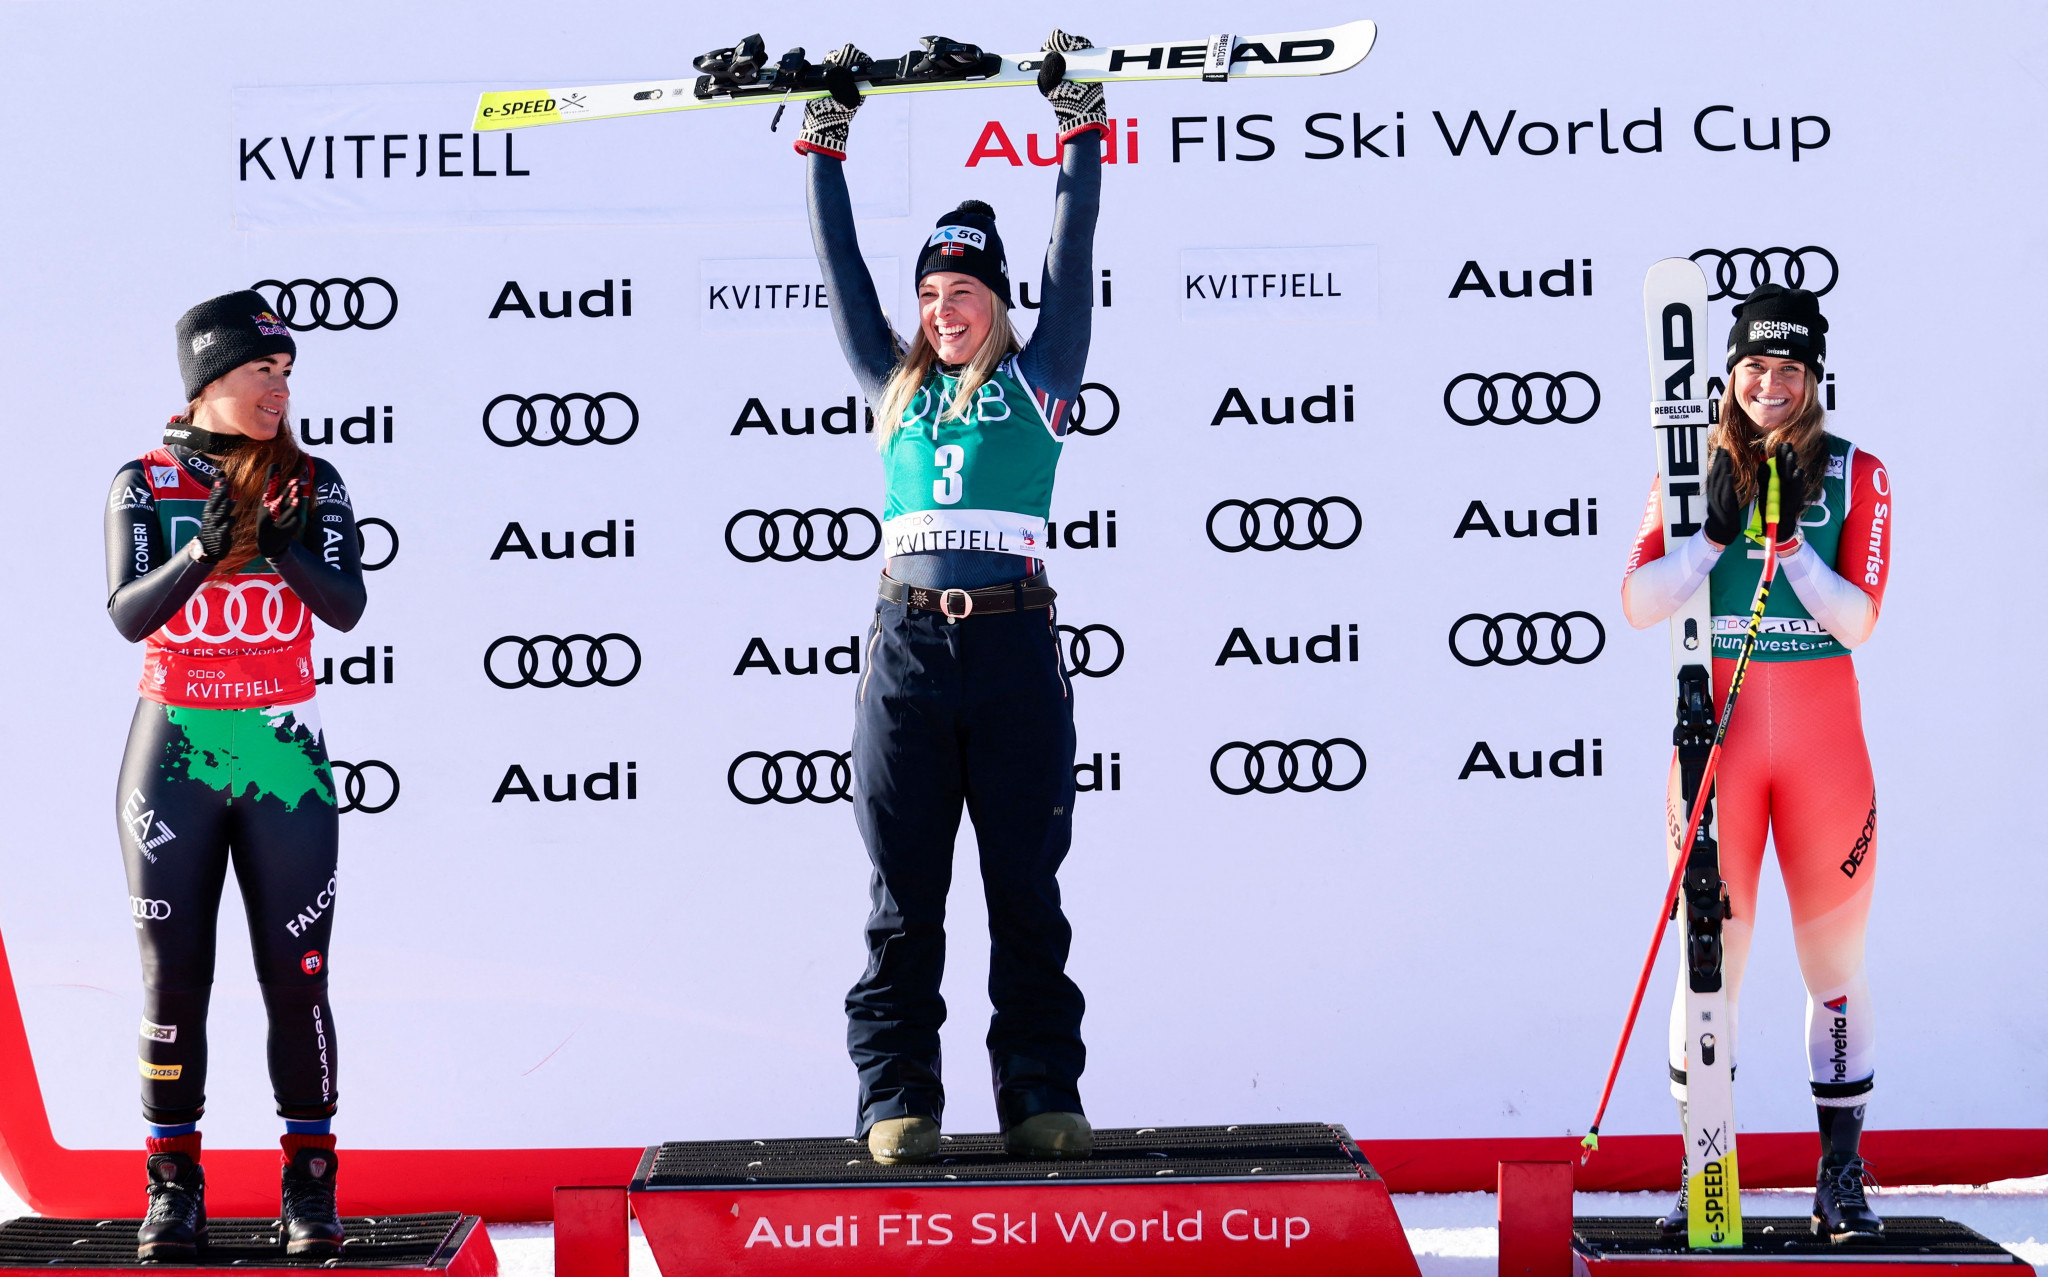 The podium for the Alpine Skiing World Cup downhill event in Kvitfjell, won by Norway's Kajsa Vickhoff Lie, centre 